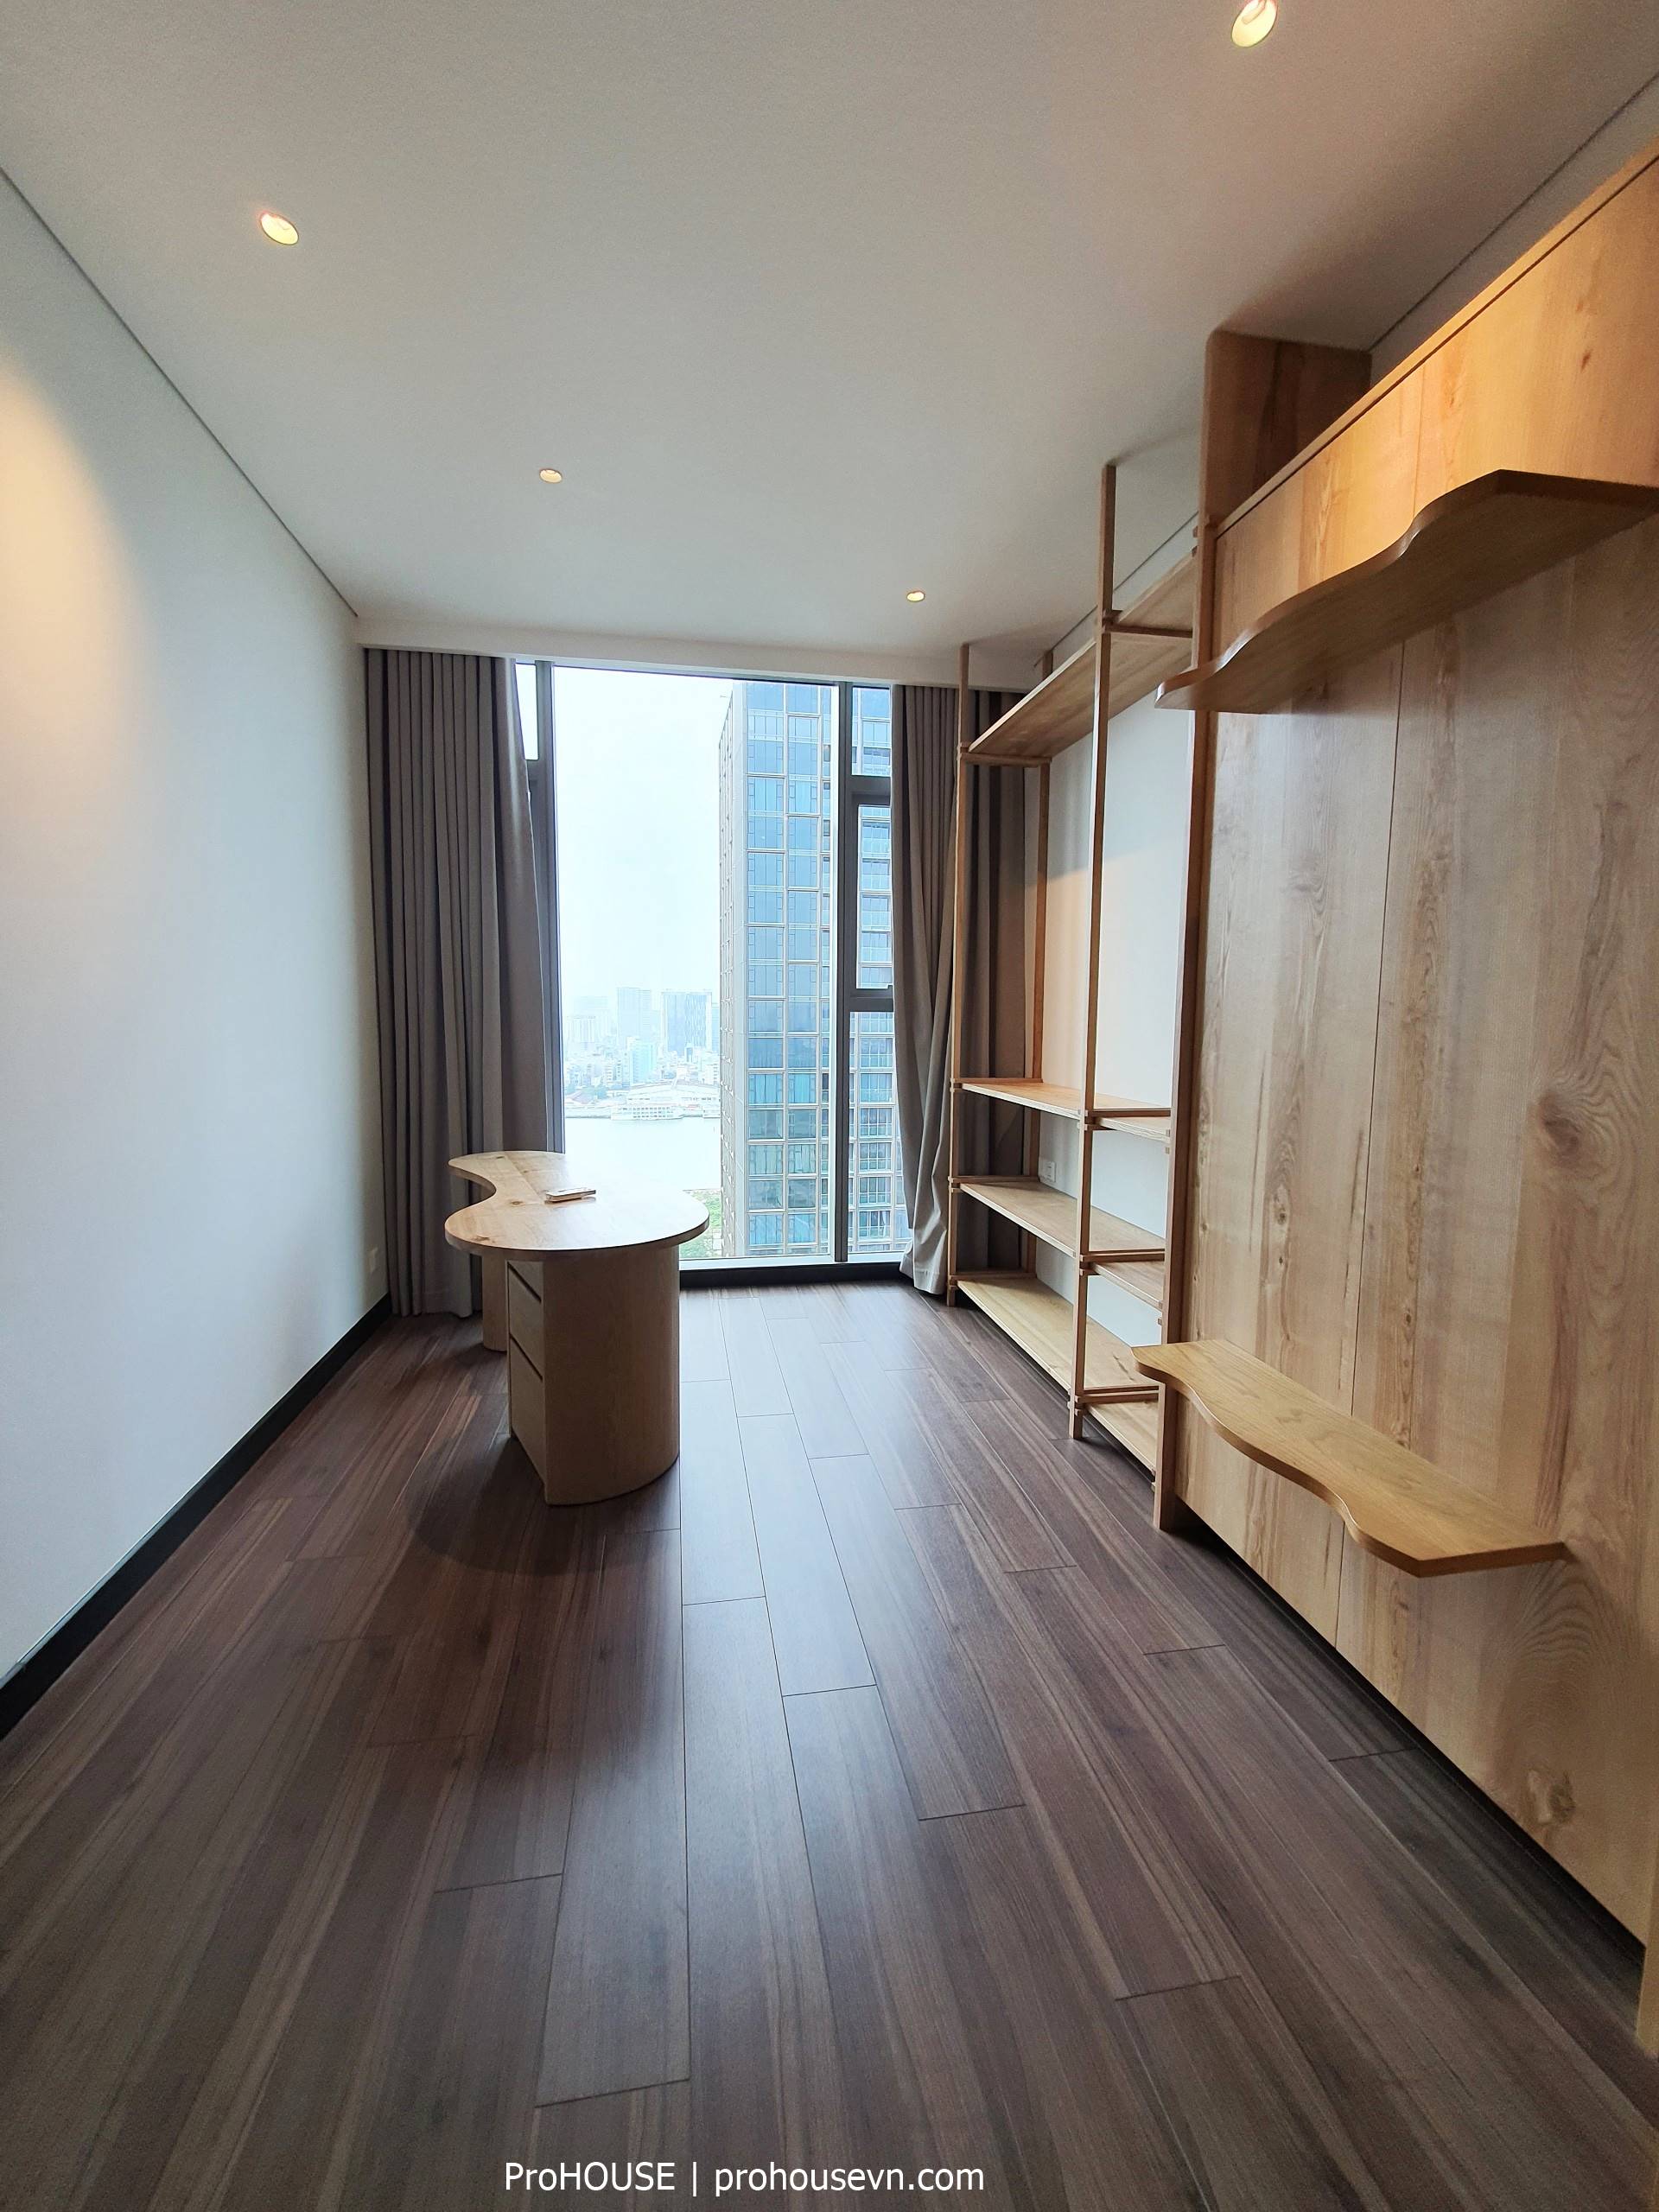 Japanese Style apartment for rent in Empire City with beautiful view